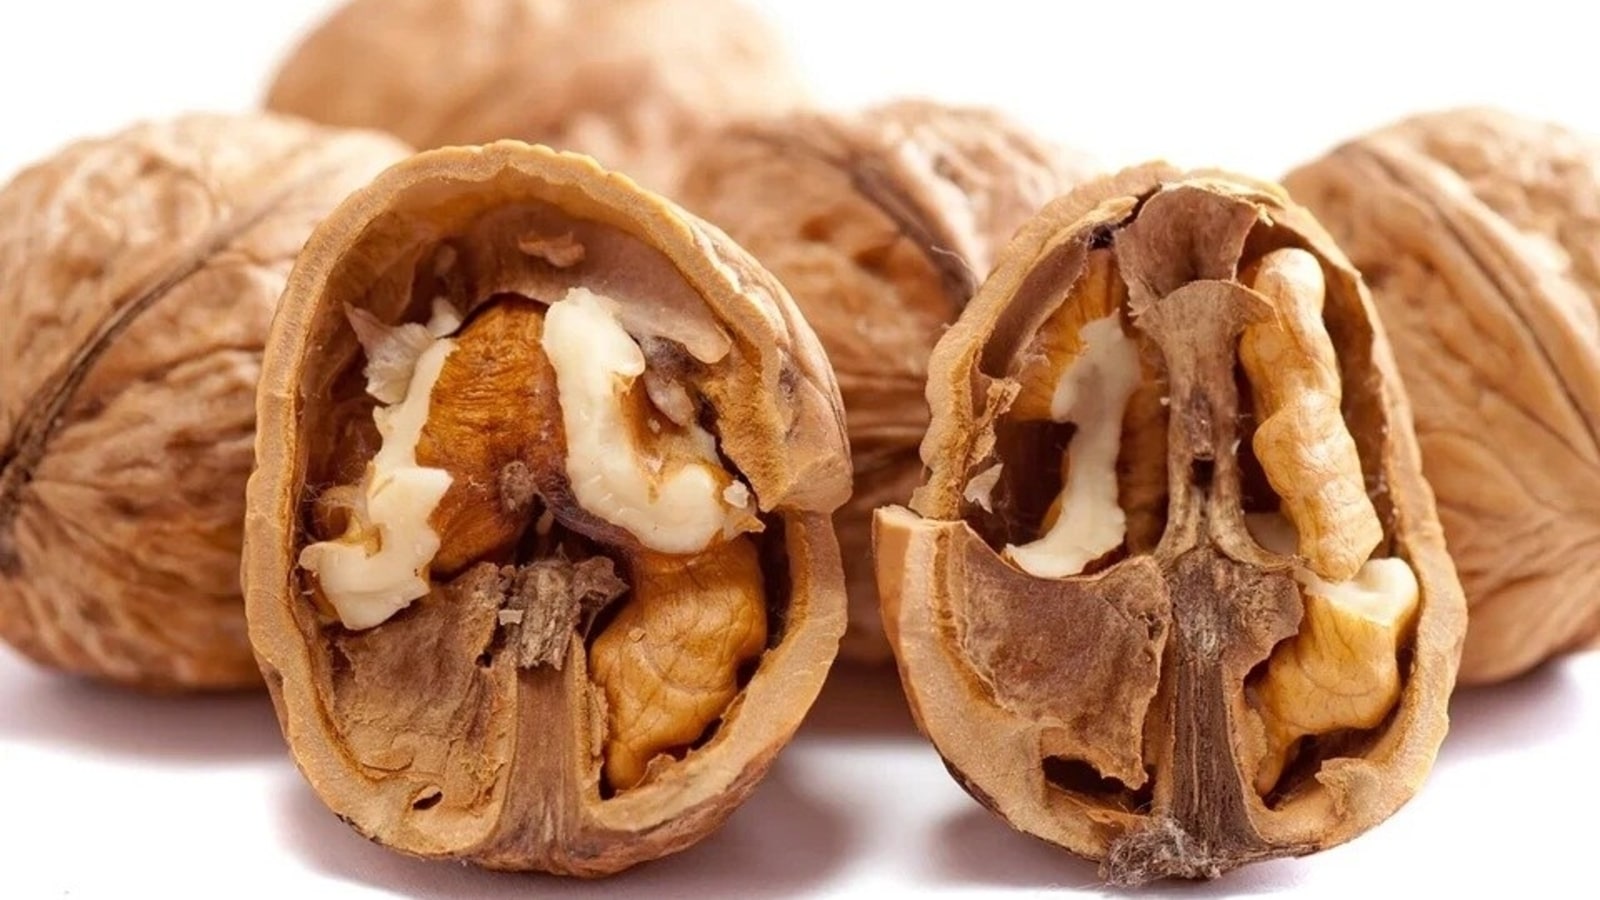 Walnut Benefits Walnut will get rid of unwanted hair, follow these home remedies